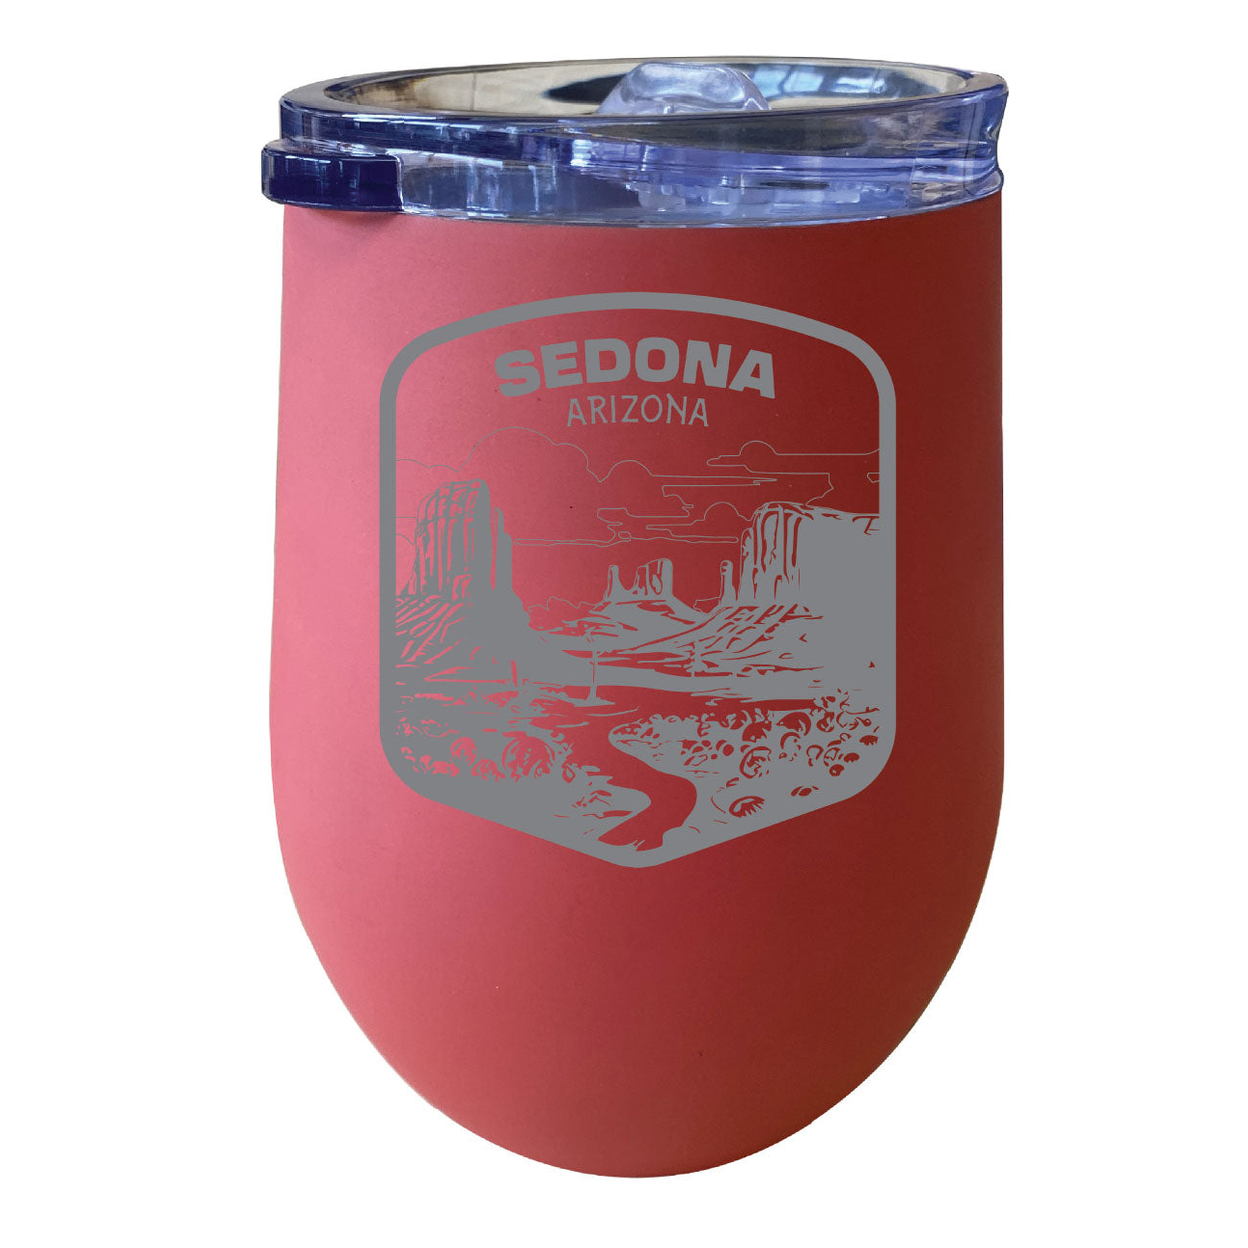 Sedona Arizona Souvenir 12 Oz Engraved Insulated Wine Stainless Steel Tumbler - Coral,,2-Pack